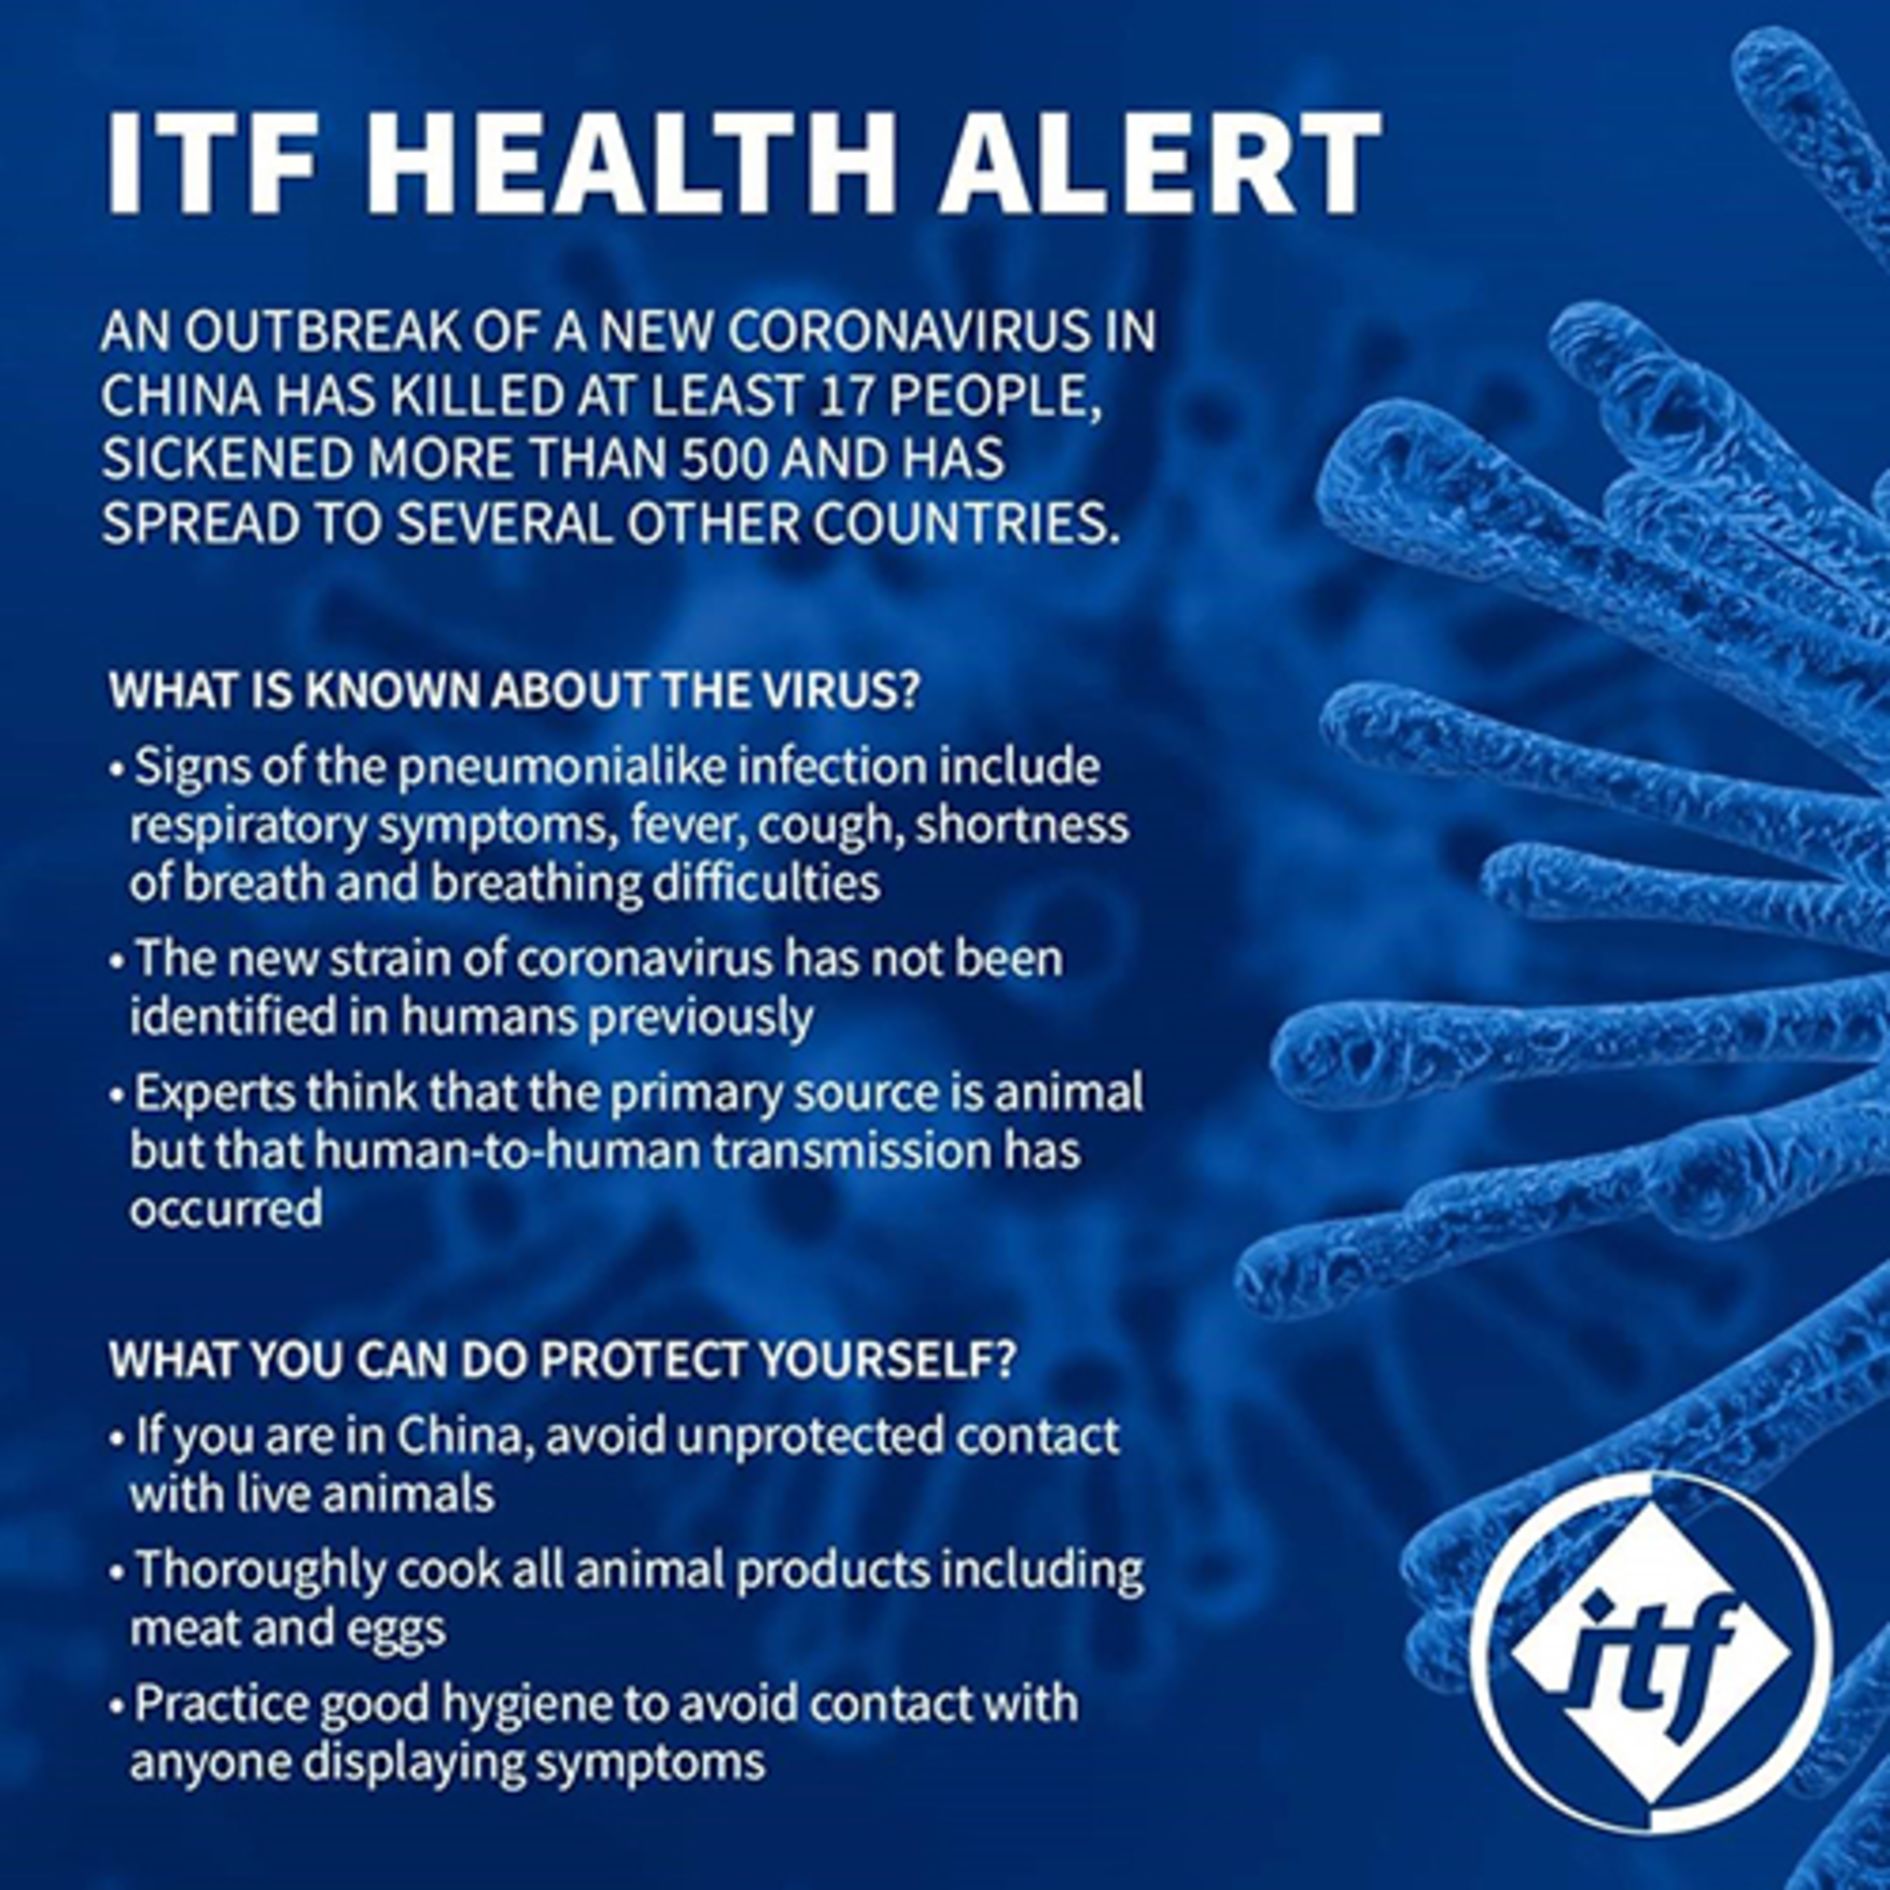 Global Shipping Body (ICS) issues guidance to shipowners in the face of the Corona Virus